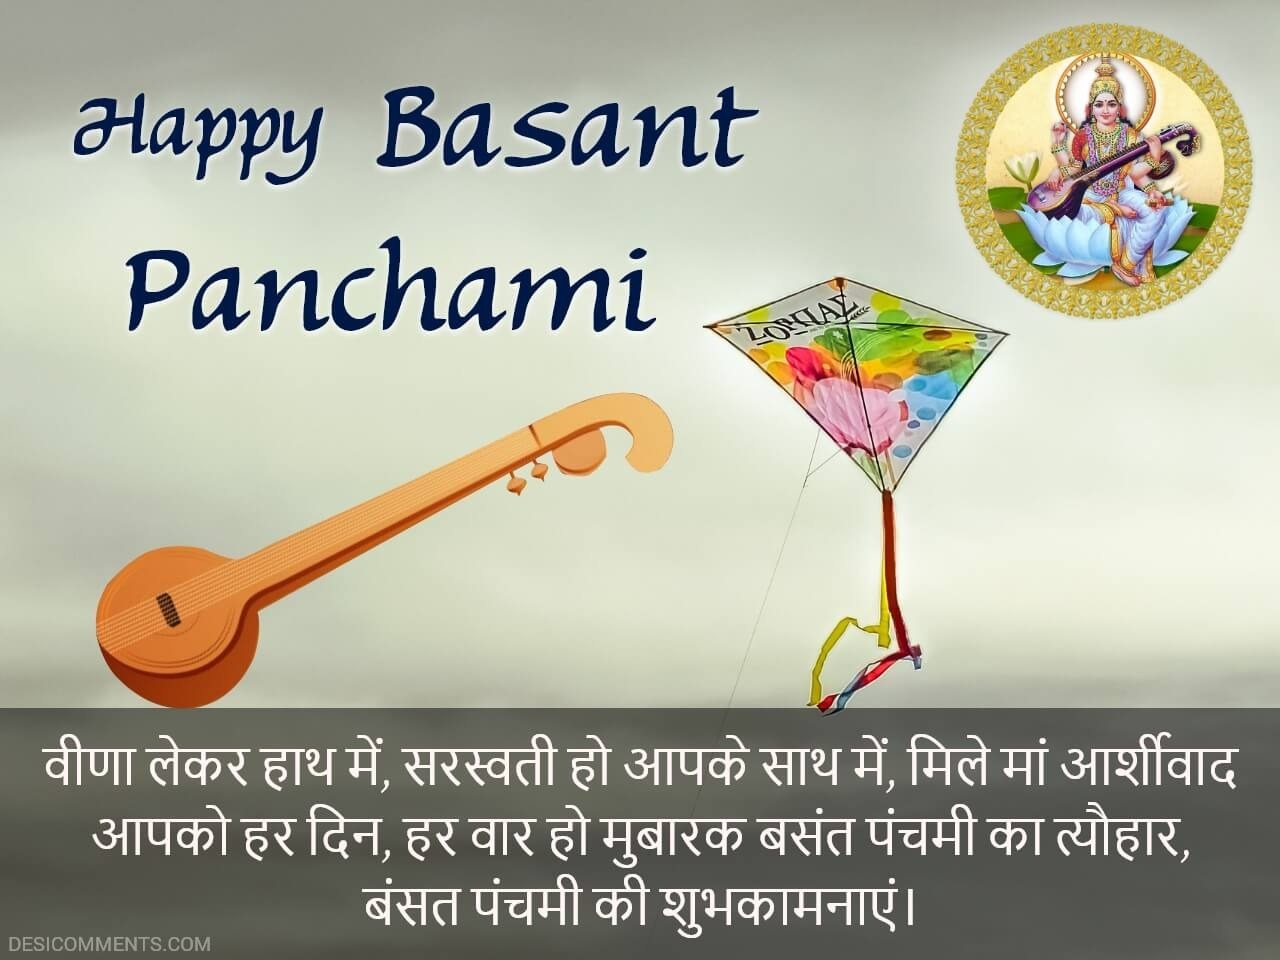 110+ Basant Panchami Images, Pictures, Photos - Page 2